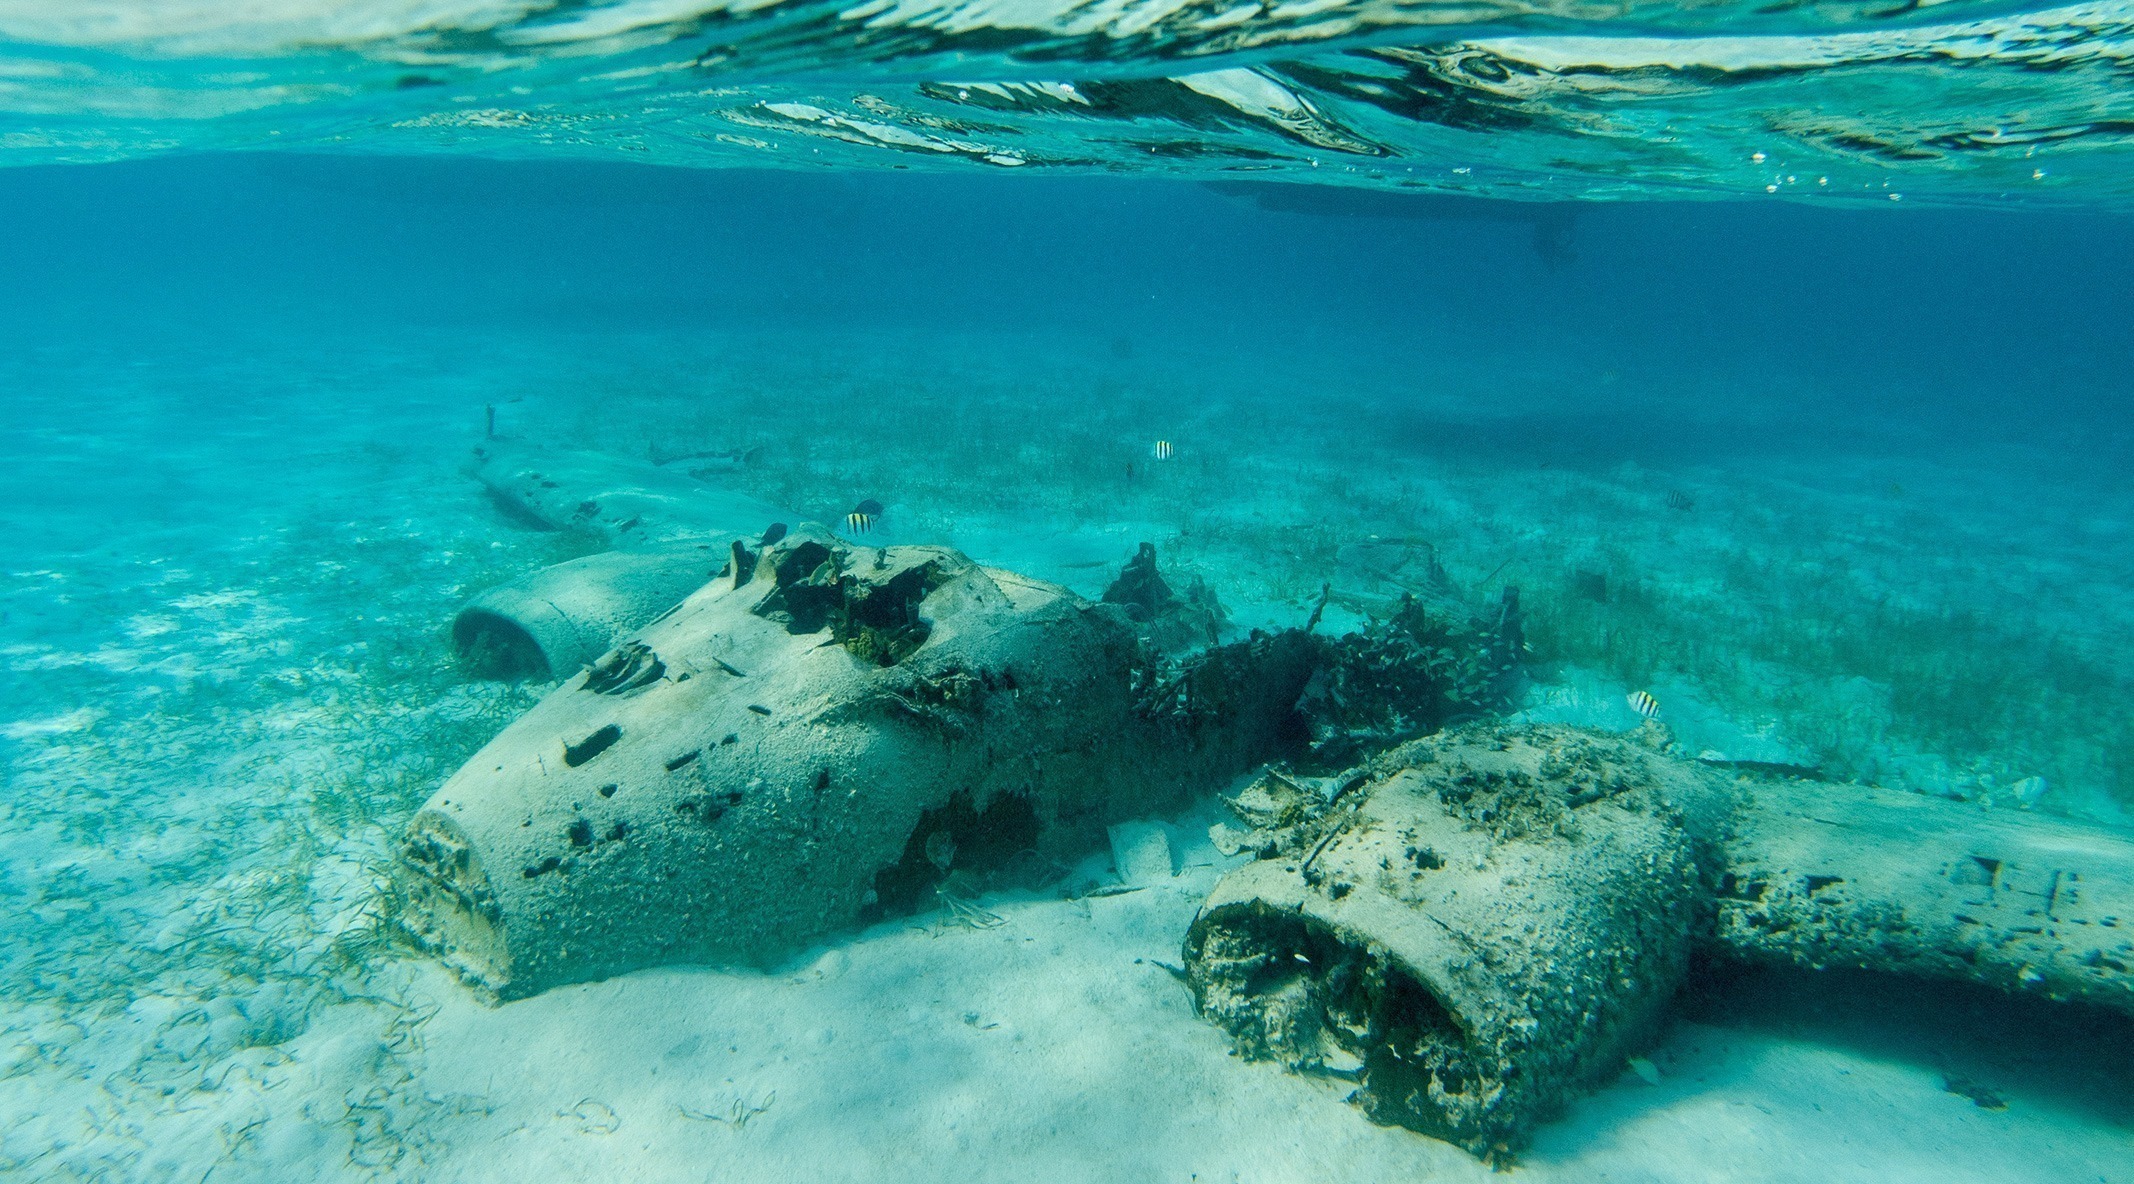 The remains of a plane are floating in the water during Bahamas Travel.